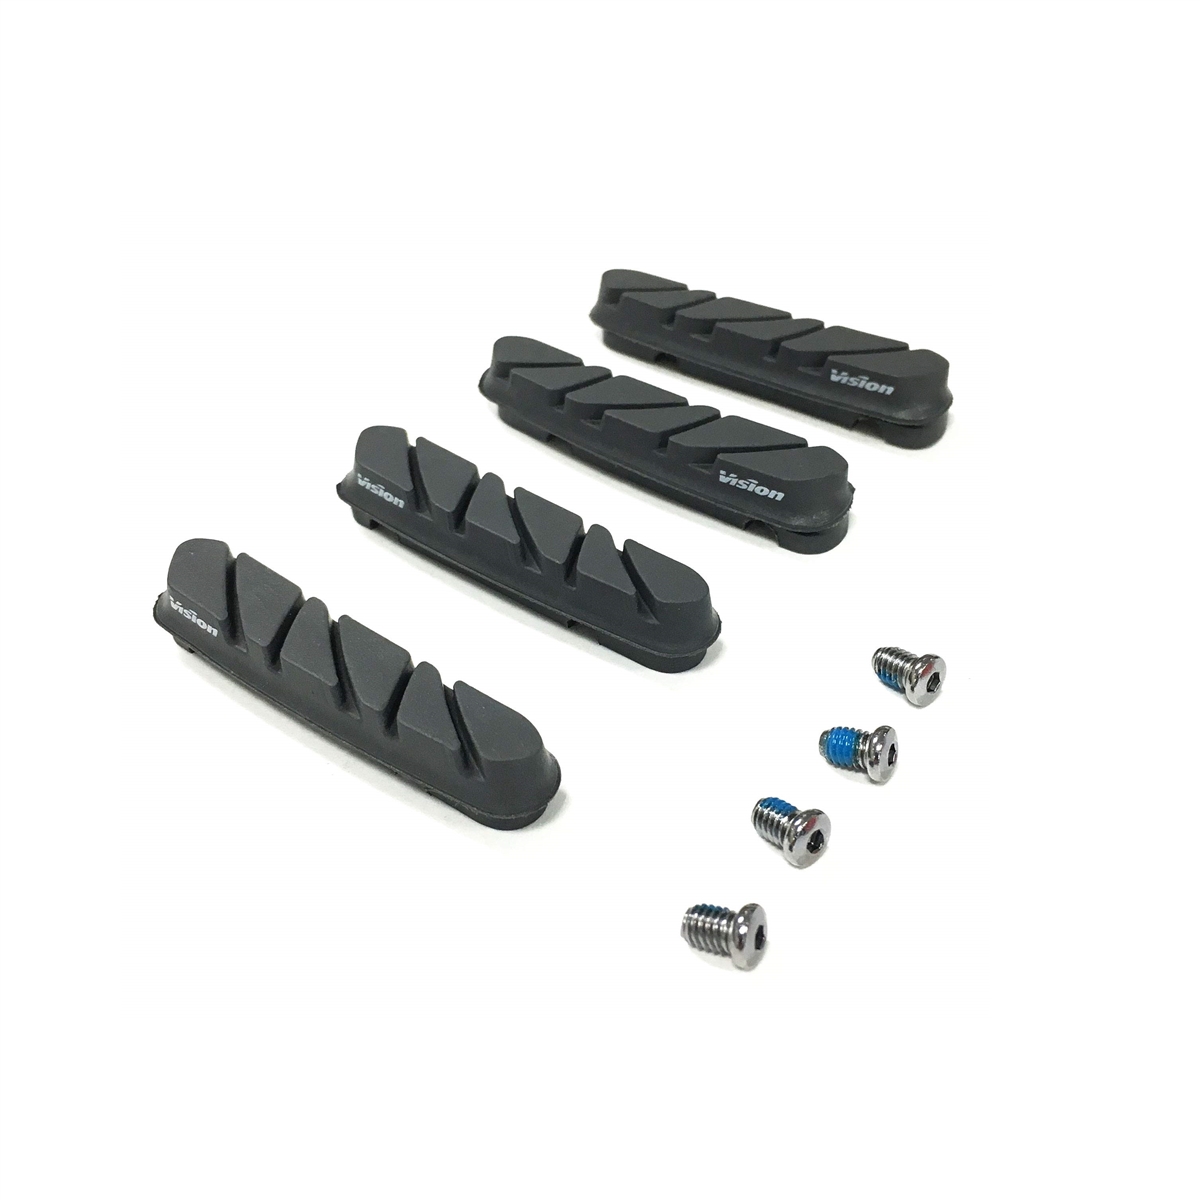 Brake pads T-83 for carbon rims compatible Shimano 4 pieces for packaging E0065